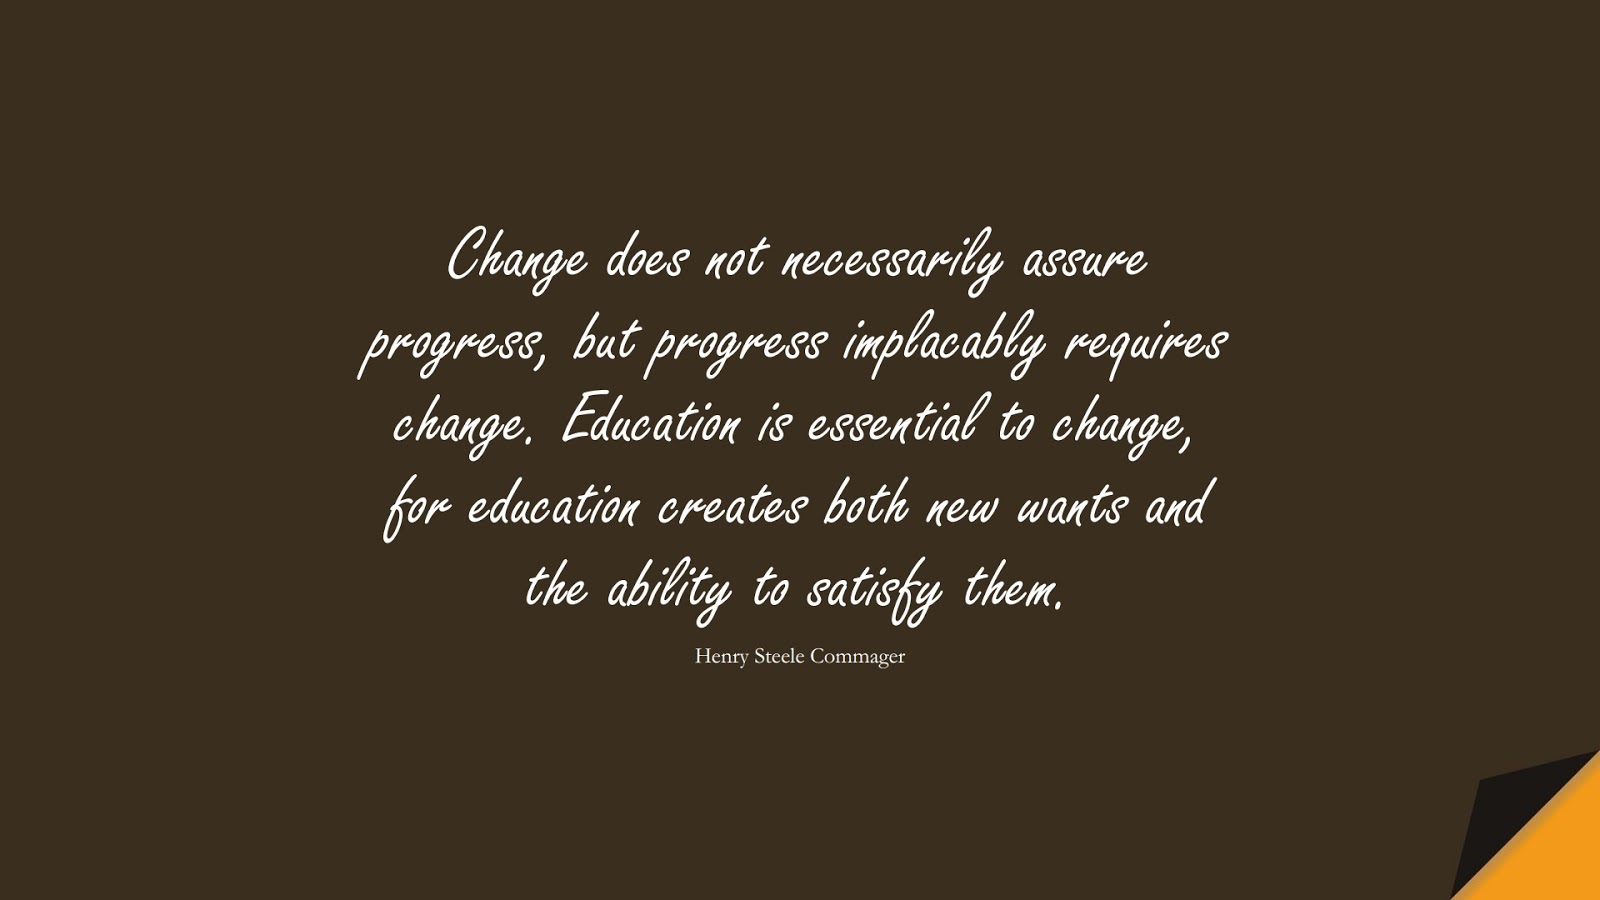 Change does not necessarily assure progress, but progress implacably requires change. Education is essential to change, for education creates both new wants and the ability to satisfy them. (Henry Steele Commager);  #ChangeQuotes